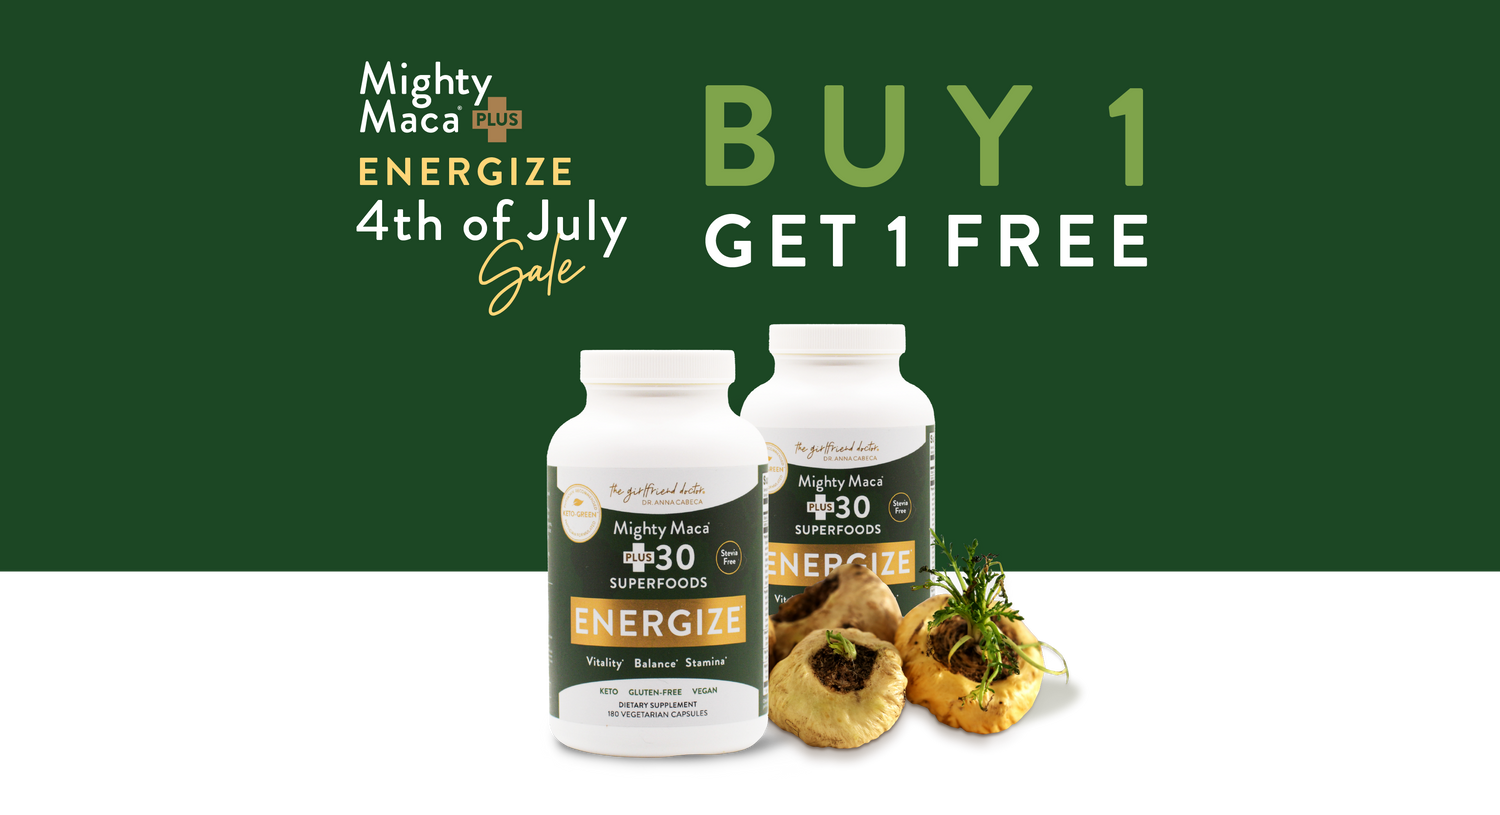 Mighty Maca Plus energize 4th of July Sale Buy 1 get 1 free